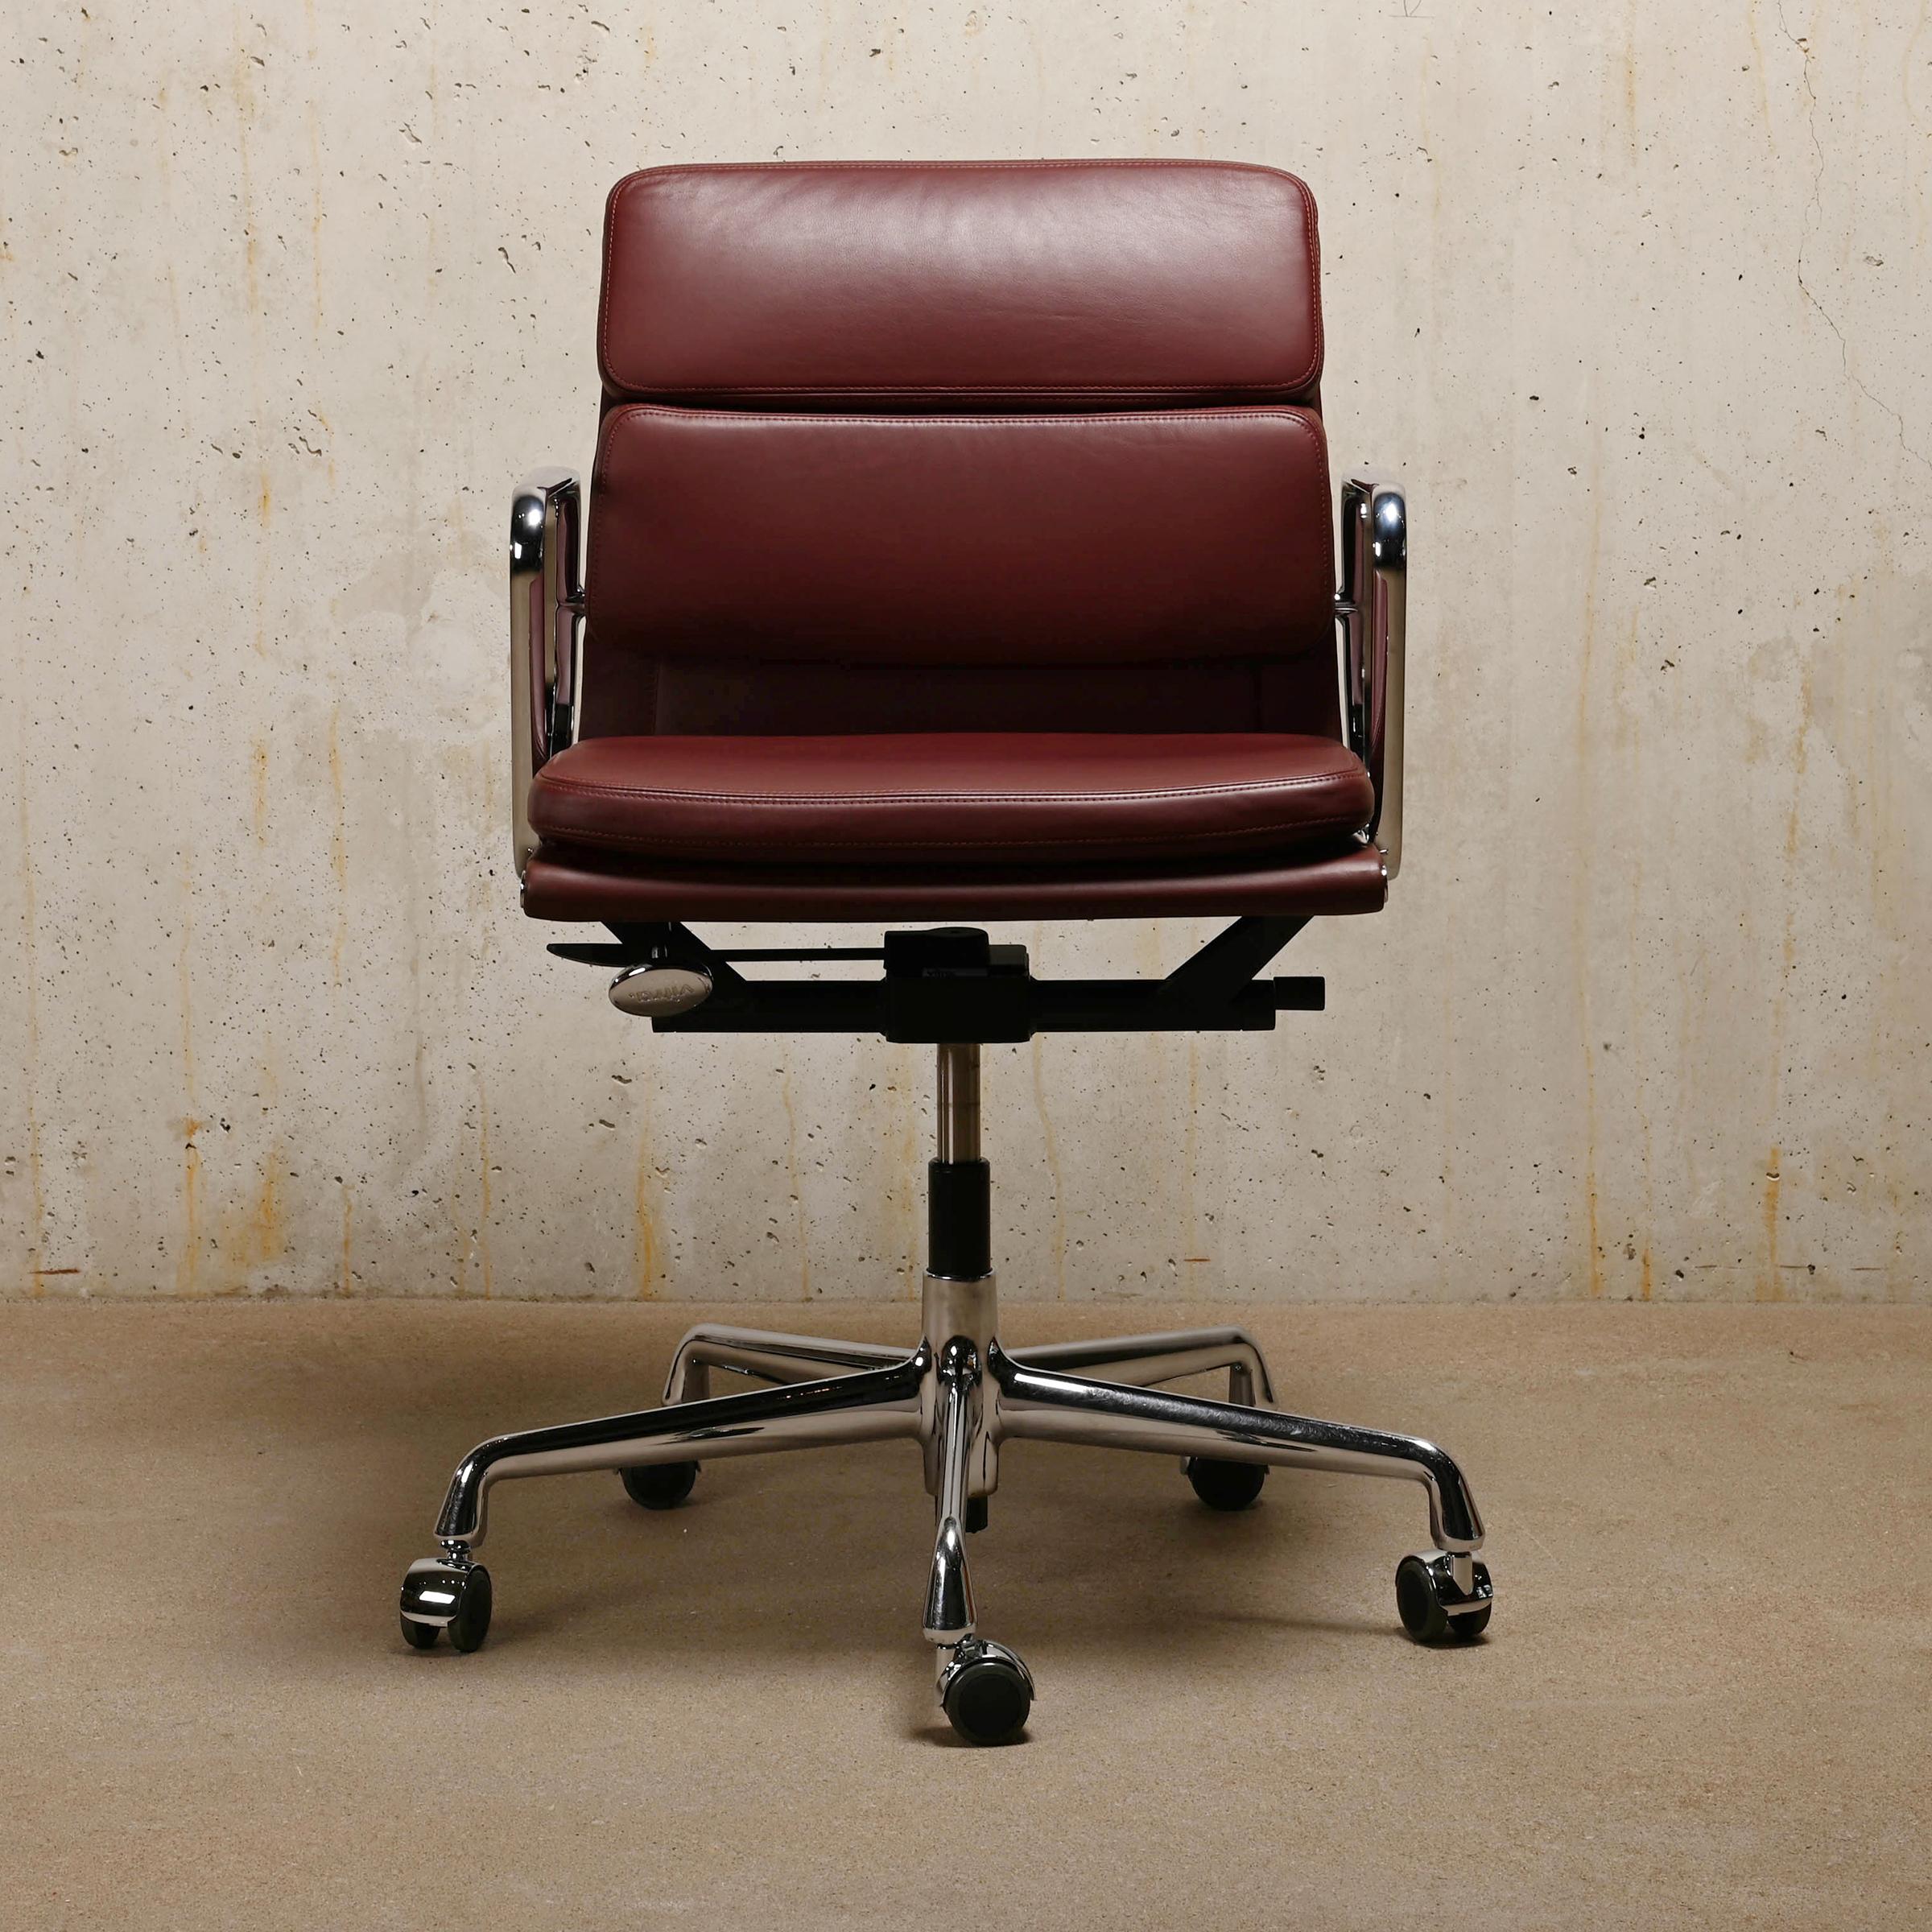 Beautiful office chair EA217 belonging to the famous Aluminum Series designed by Charles & Ray Eames for Herman Miller (US) / Vitra (EU). Exceptional comfort is guaranteed with the soft cushions in premium leather, height adjustment and tilt/swivel